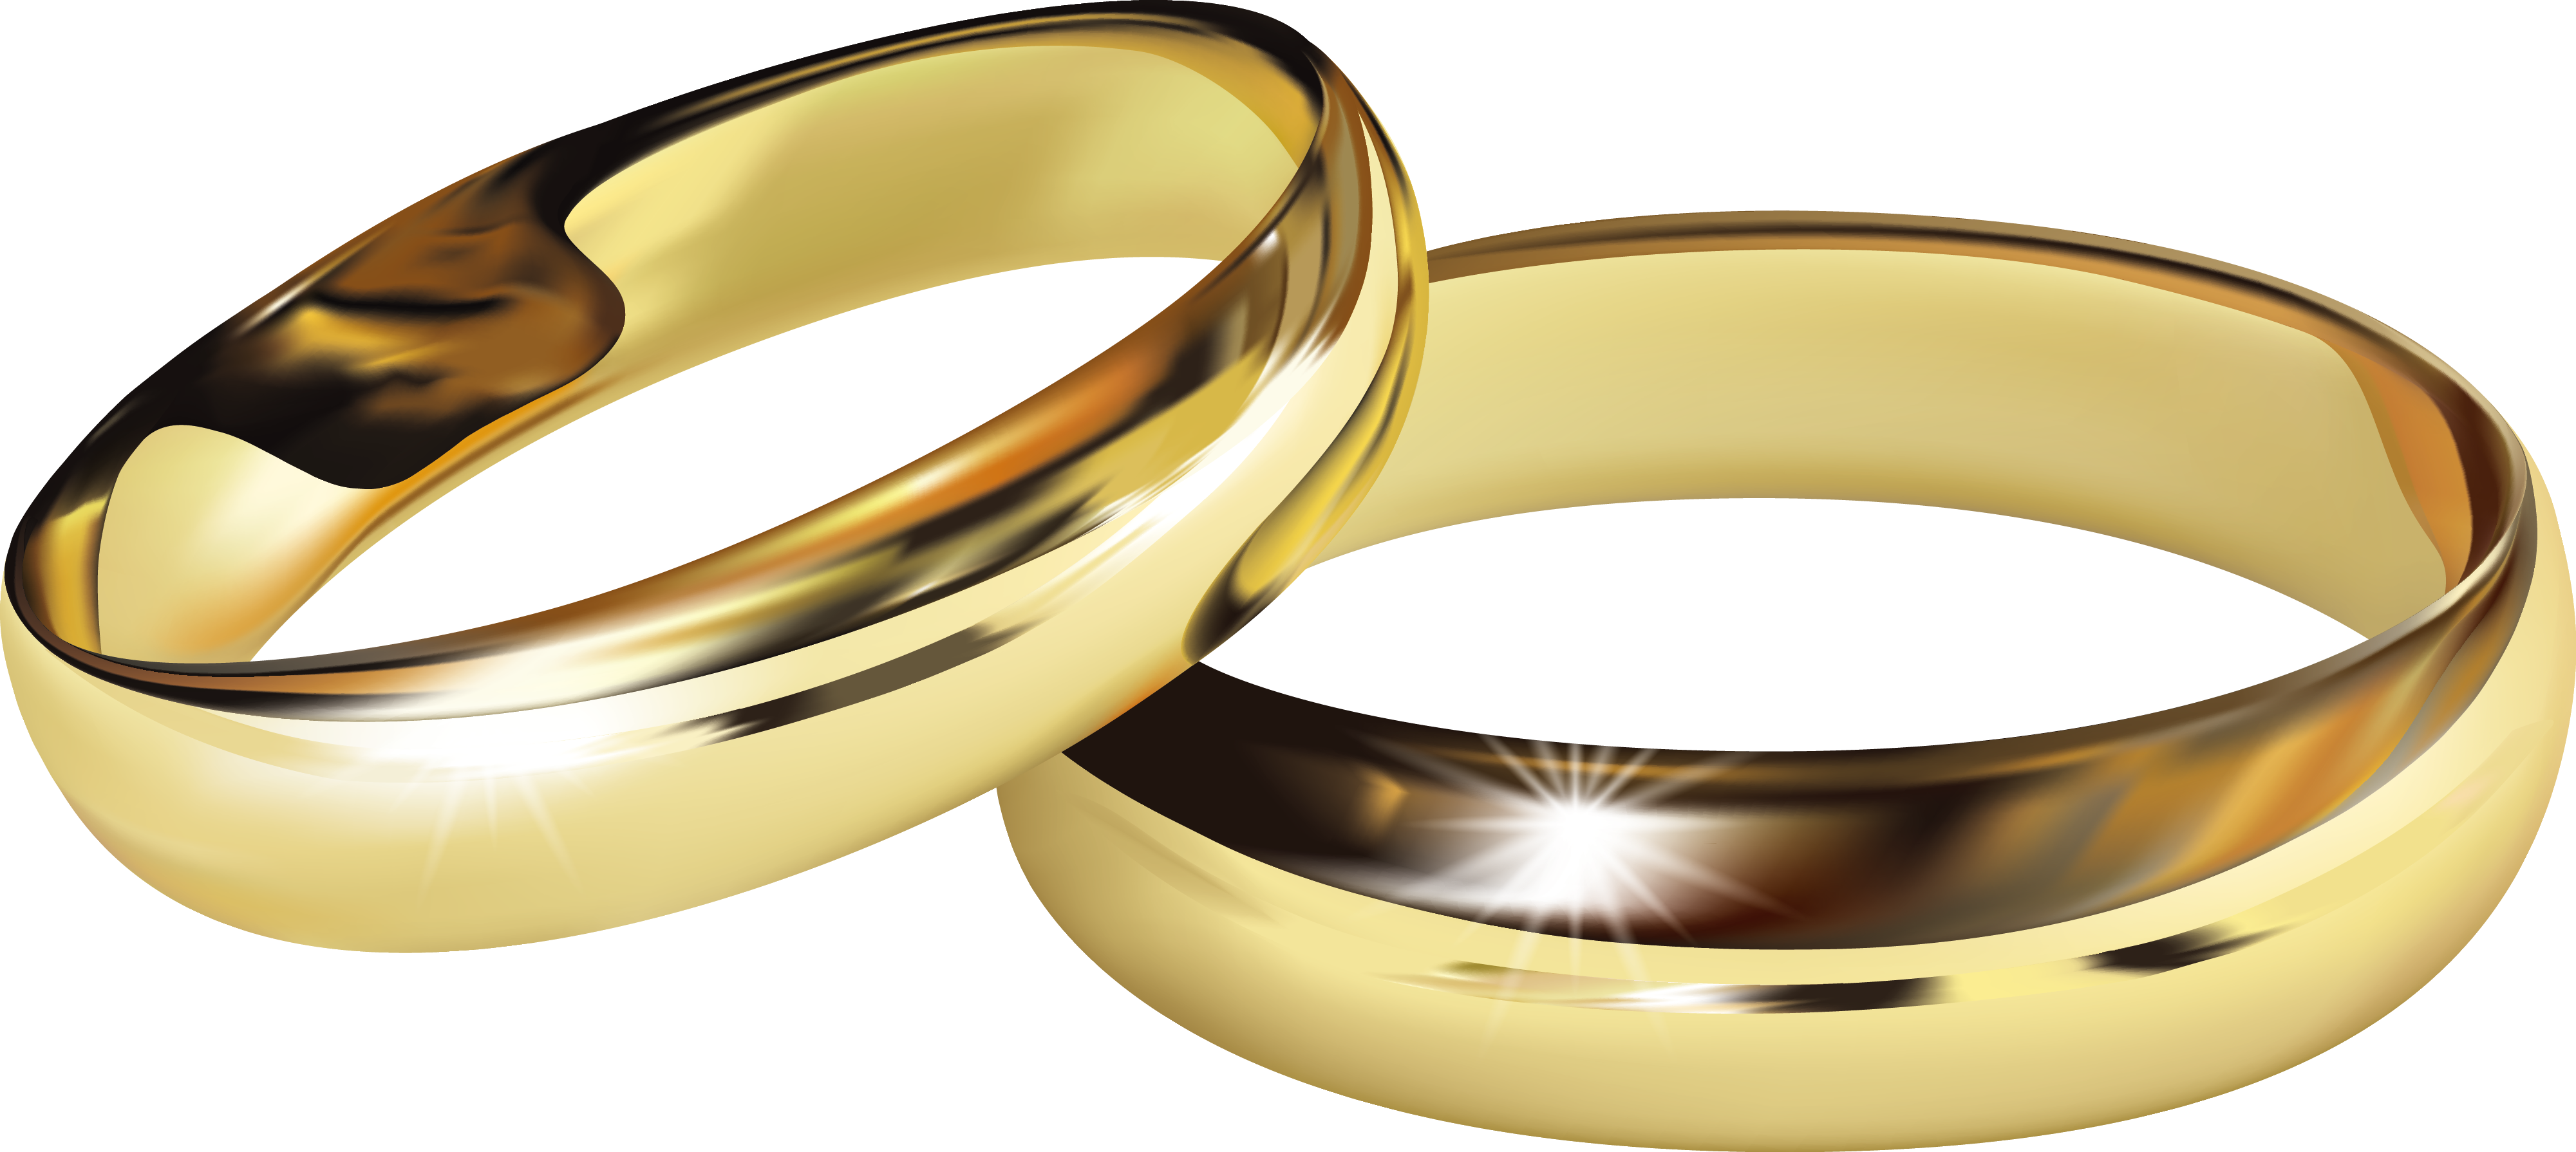 Golden Ring PNG Pic